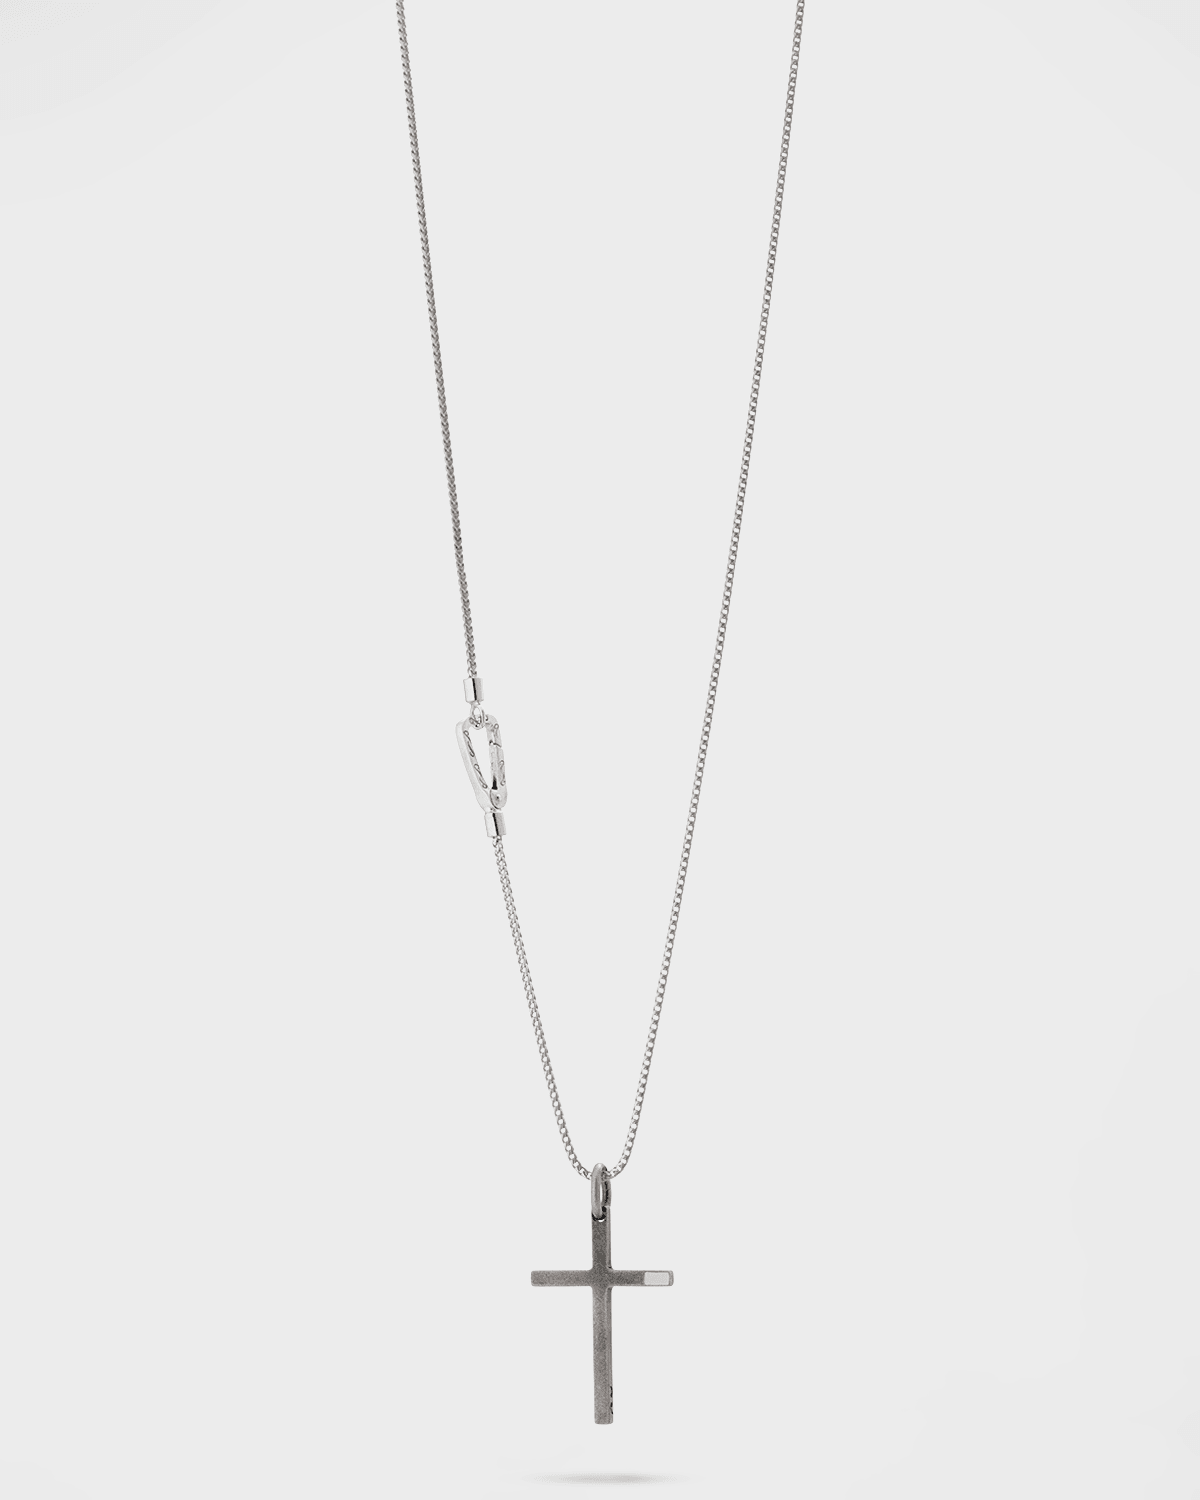 Marco Dal Maso The Cross Pendant Necklace in Oxidized Silver with Ivory Enamel.